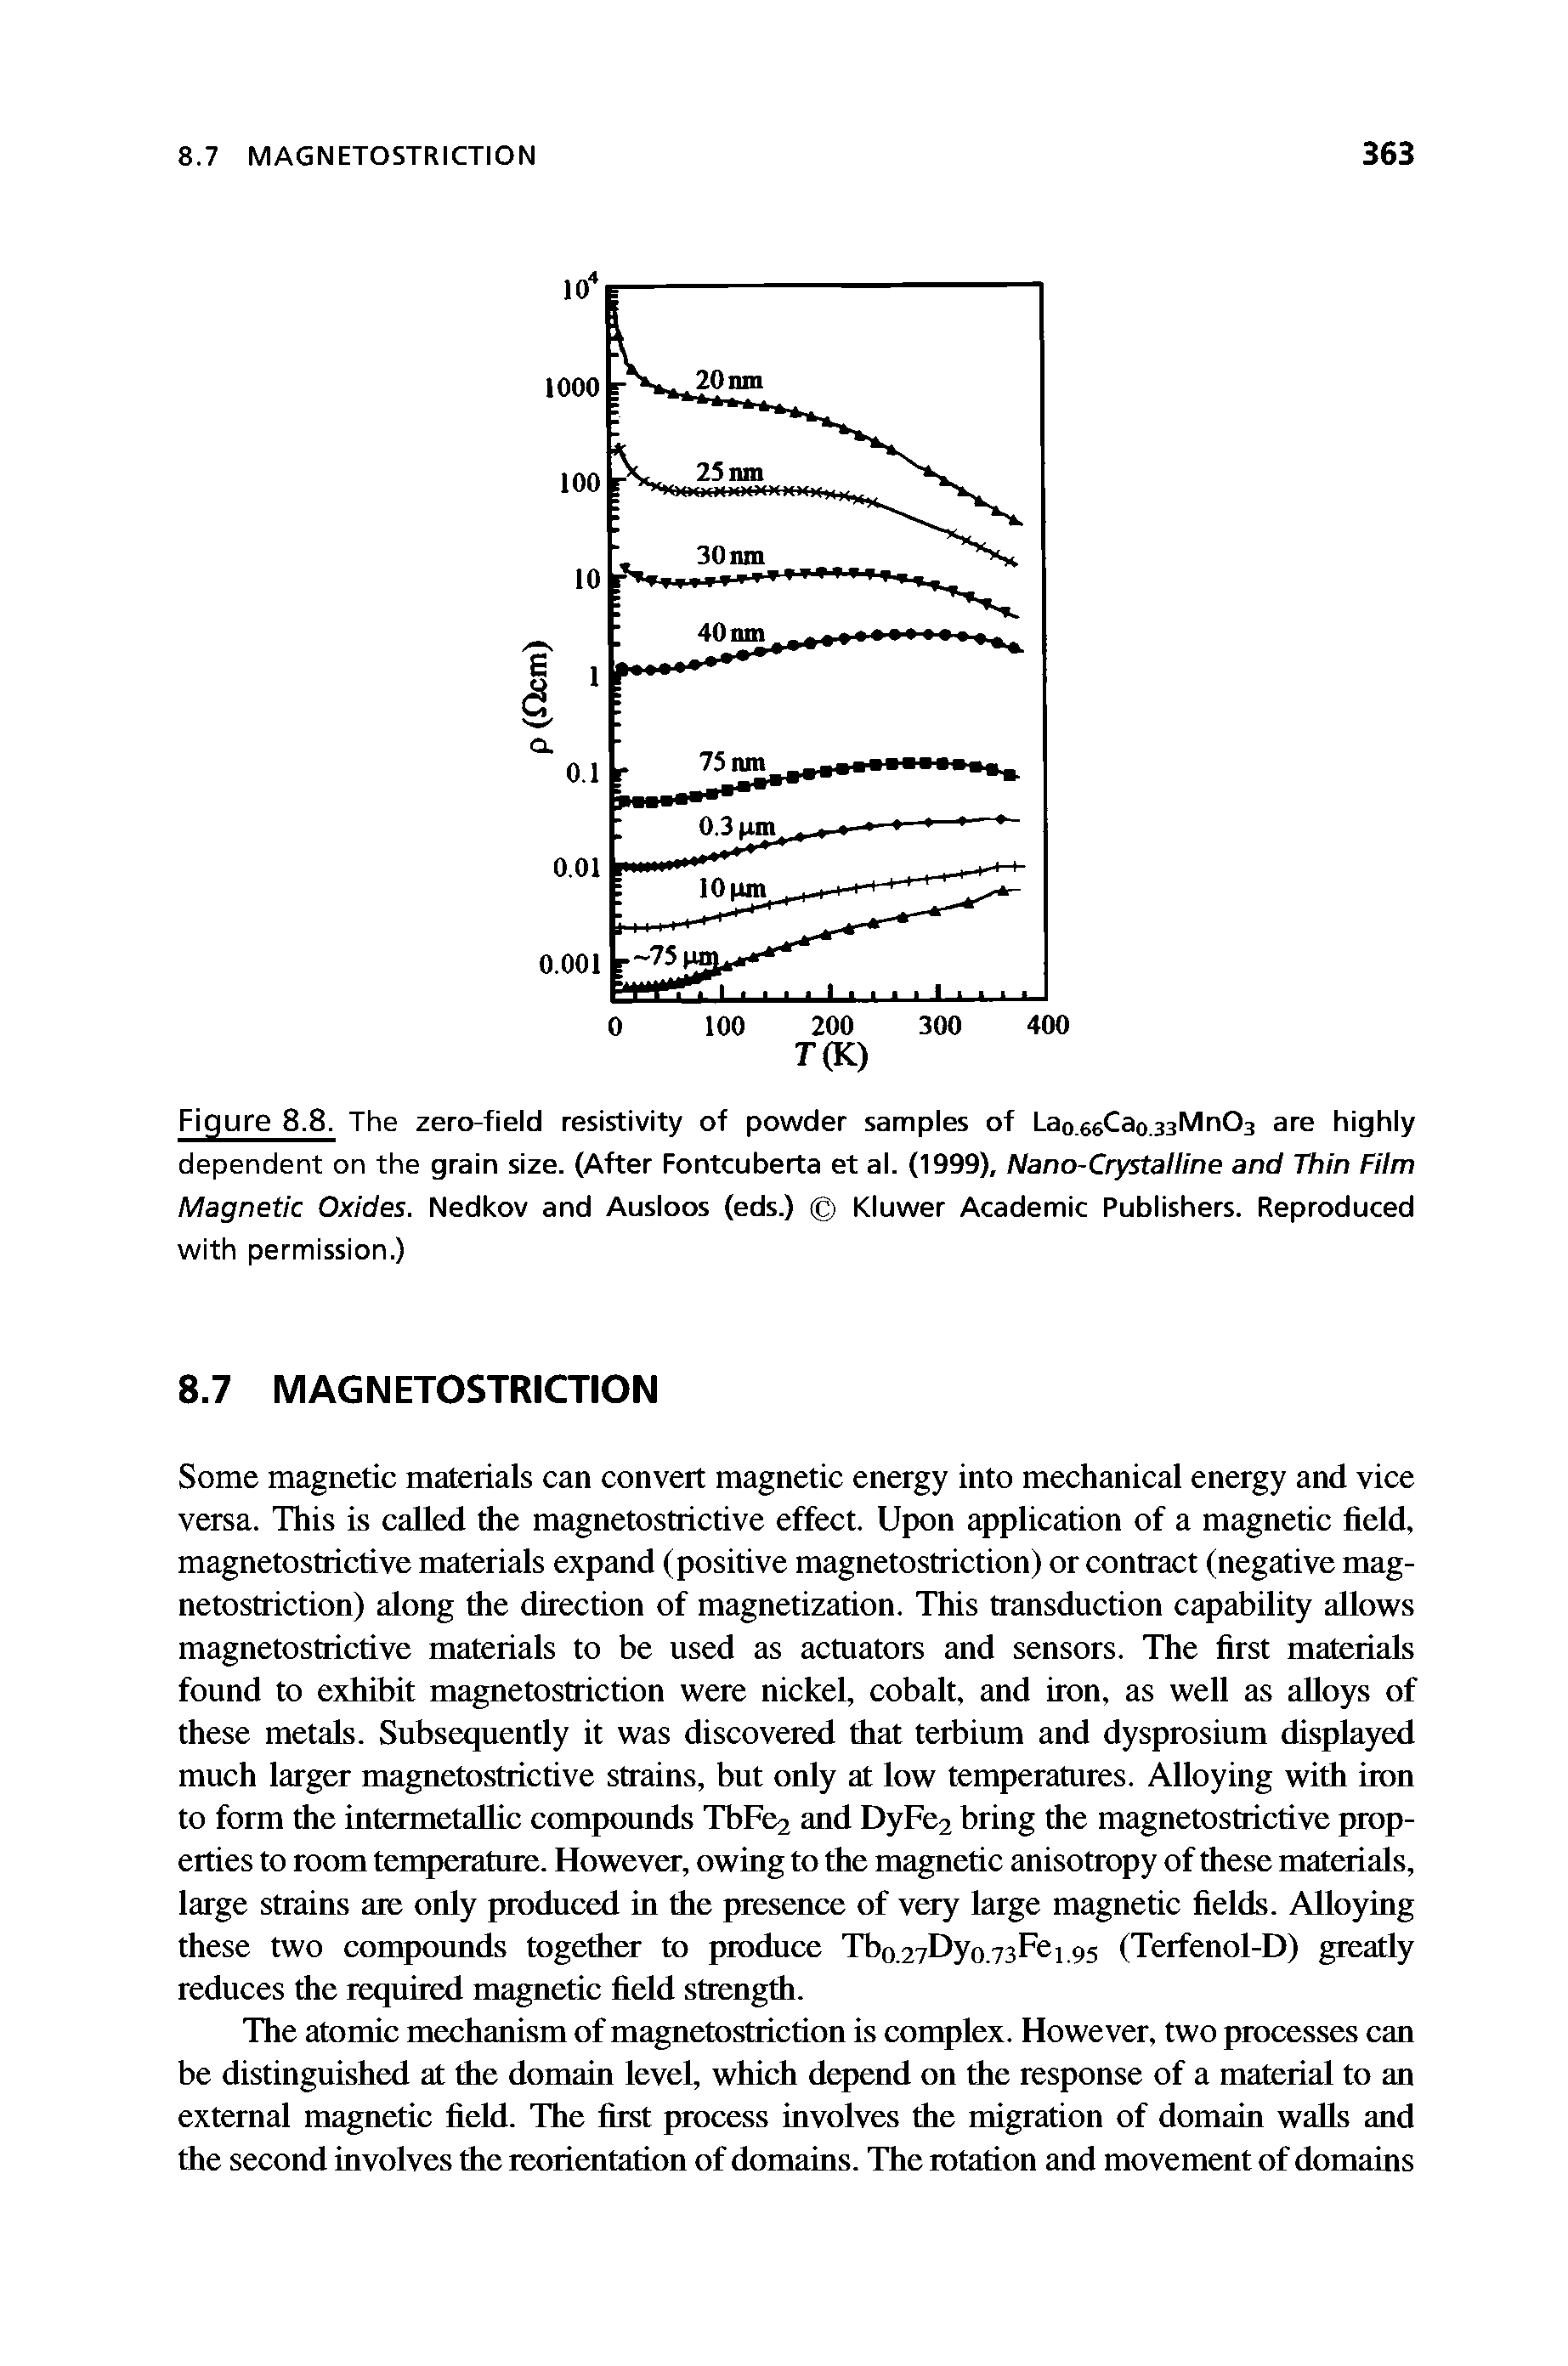 Figure 8.8. The zero-field resistivity of powder samples of Lao.ssCao.asMnOs are highly dependent on the grain size. (After Fontcuberta et al. (1999), Nano-Crystalline and Thin Film Magnetic Oxides. Nedkov and Ausloos (eds.) Kluwer Academic Publishers. Reproduced with permission.)...